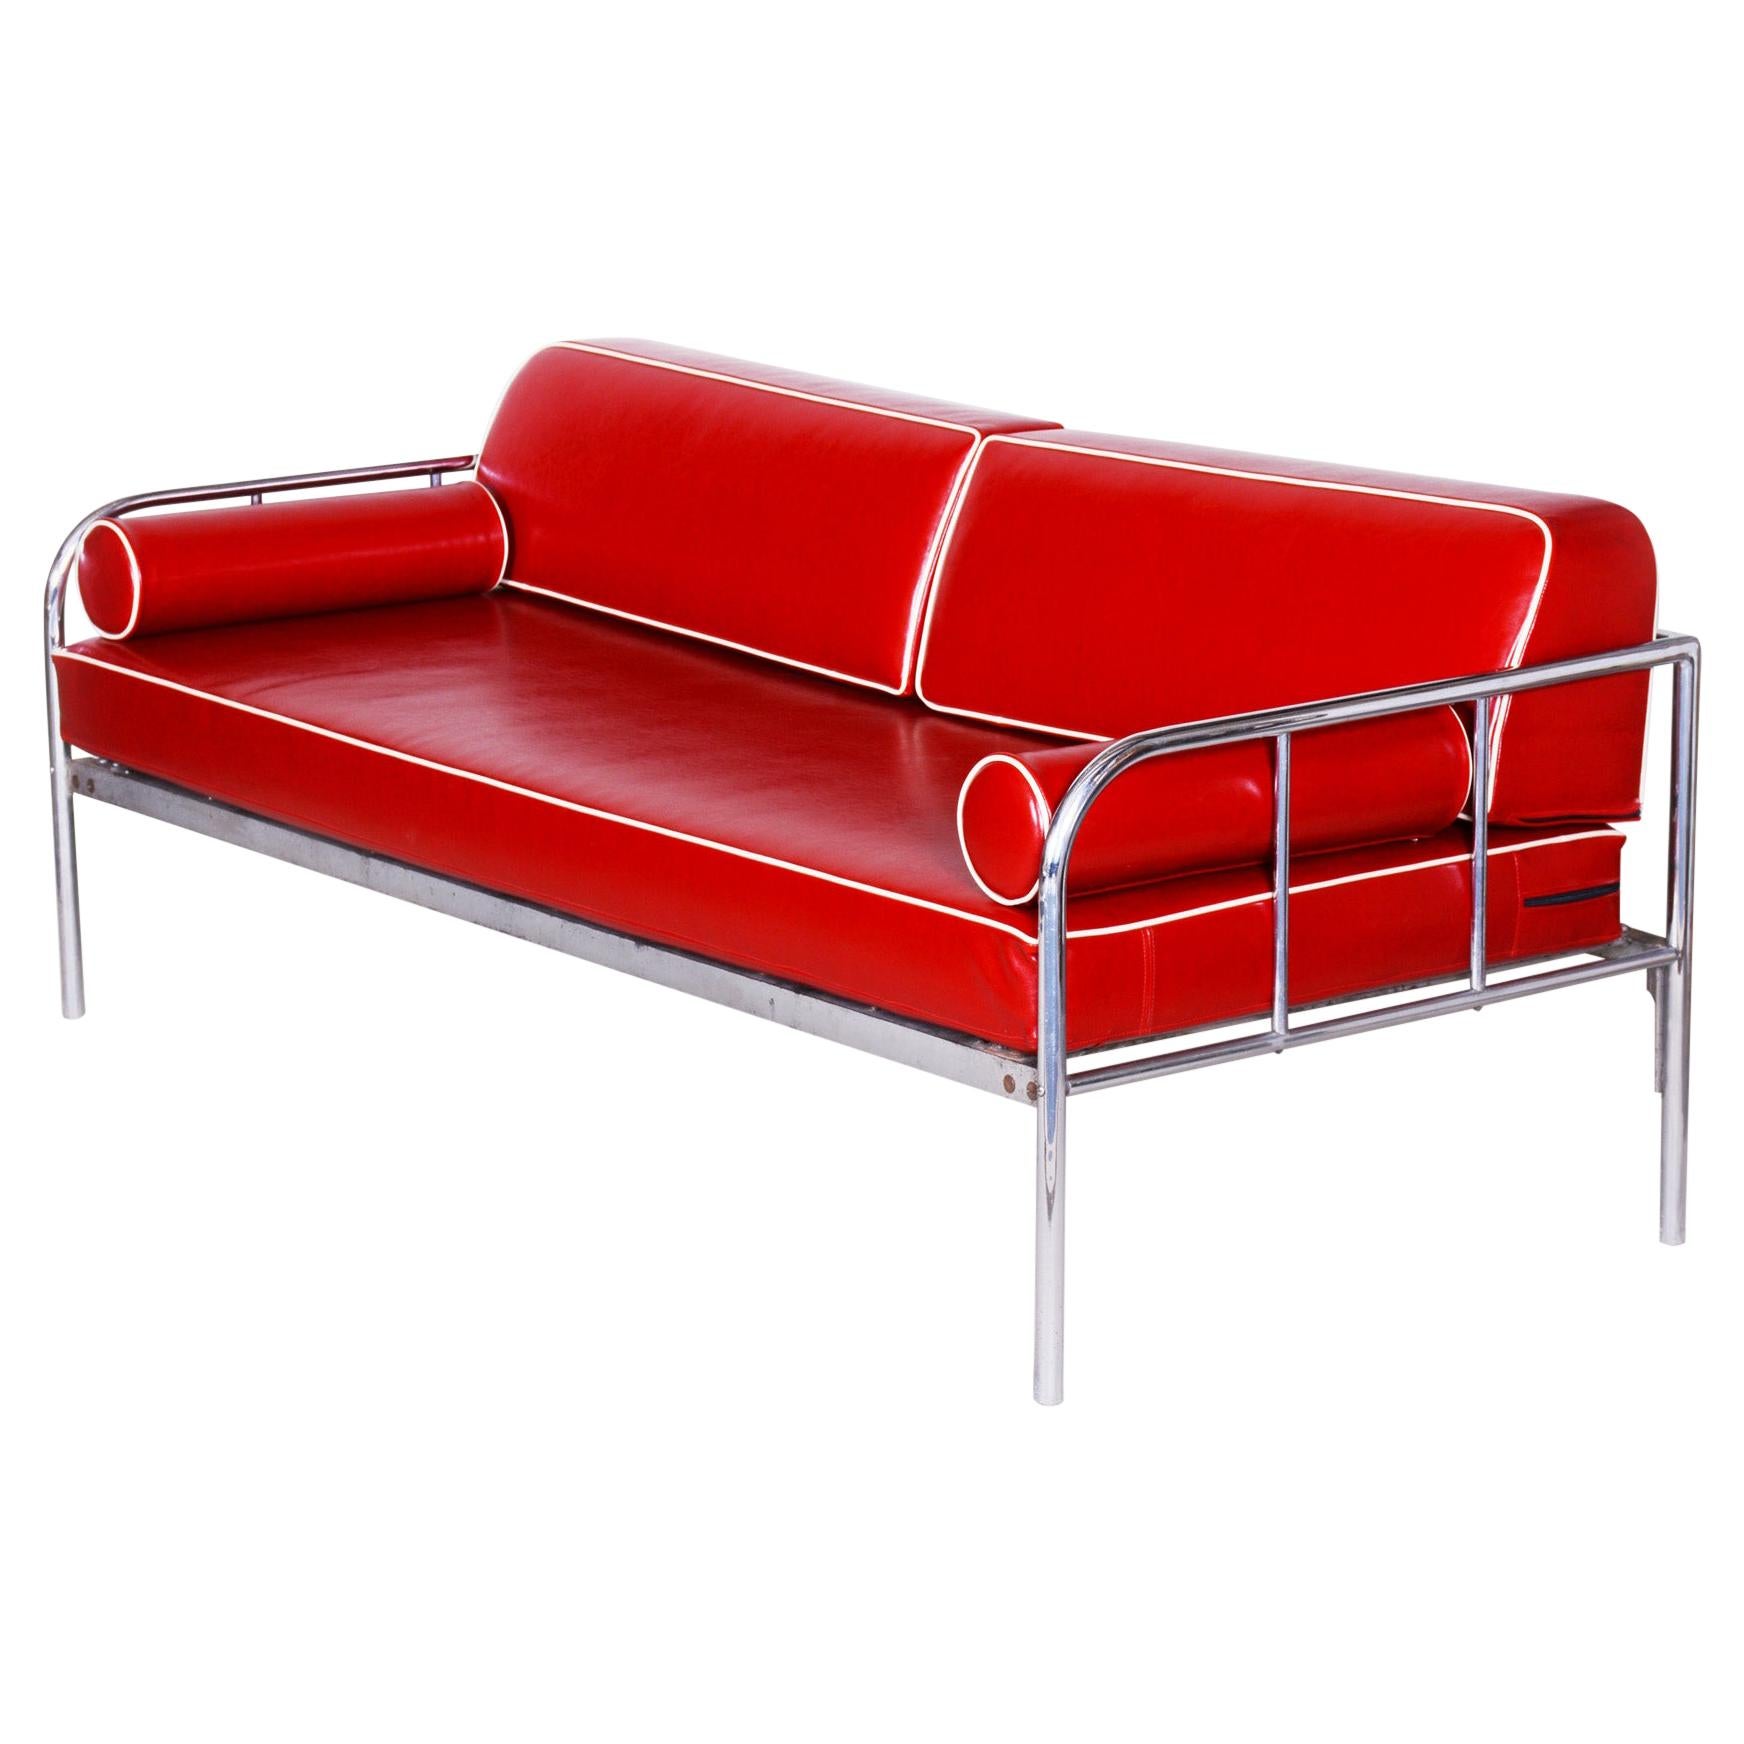 Fully Restored Bauhaus Leather and Chrome Sofa by Vichr a Spol, 1930s Czechia For Sale